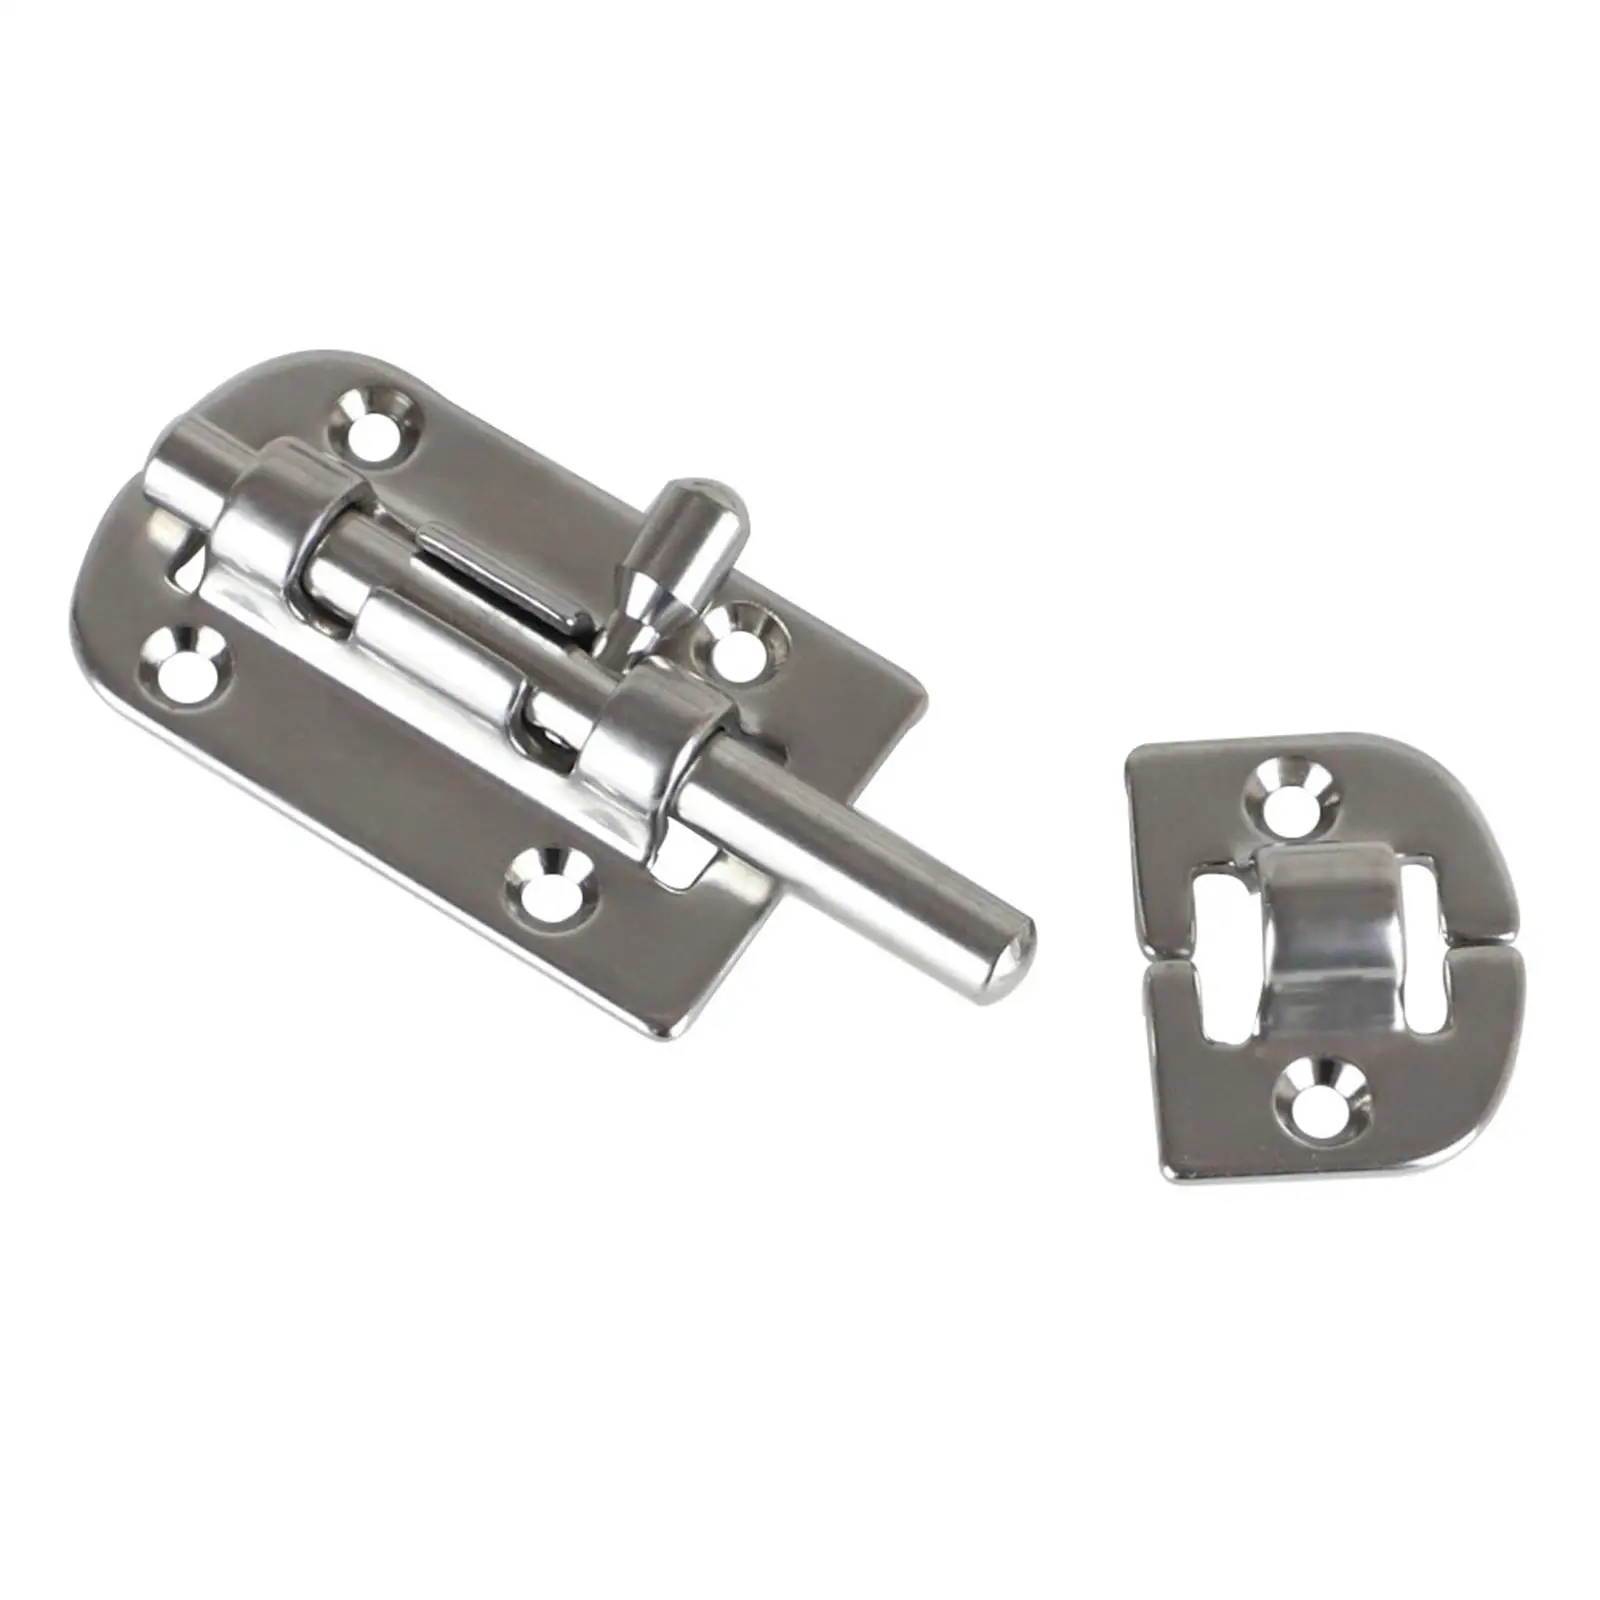 Boat Door Lock Latch Stainless Steel Durable Hardware Accessories Easy Installation Safety Protection Sliding Lock Barrel Bolt